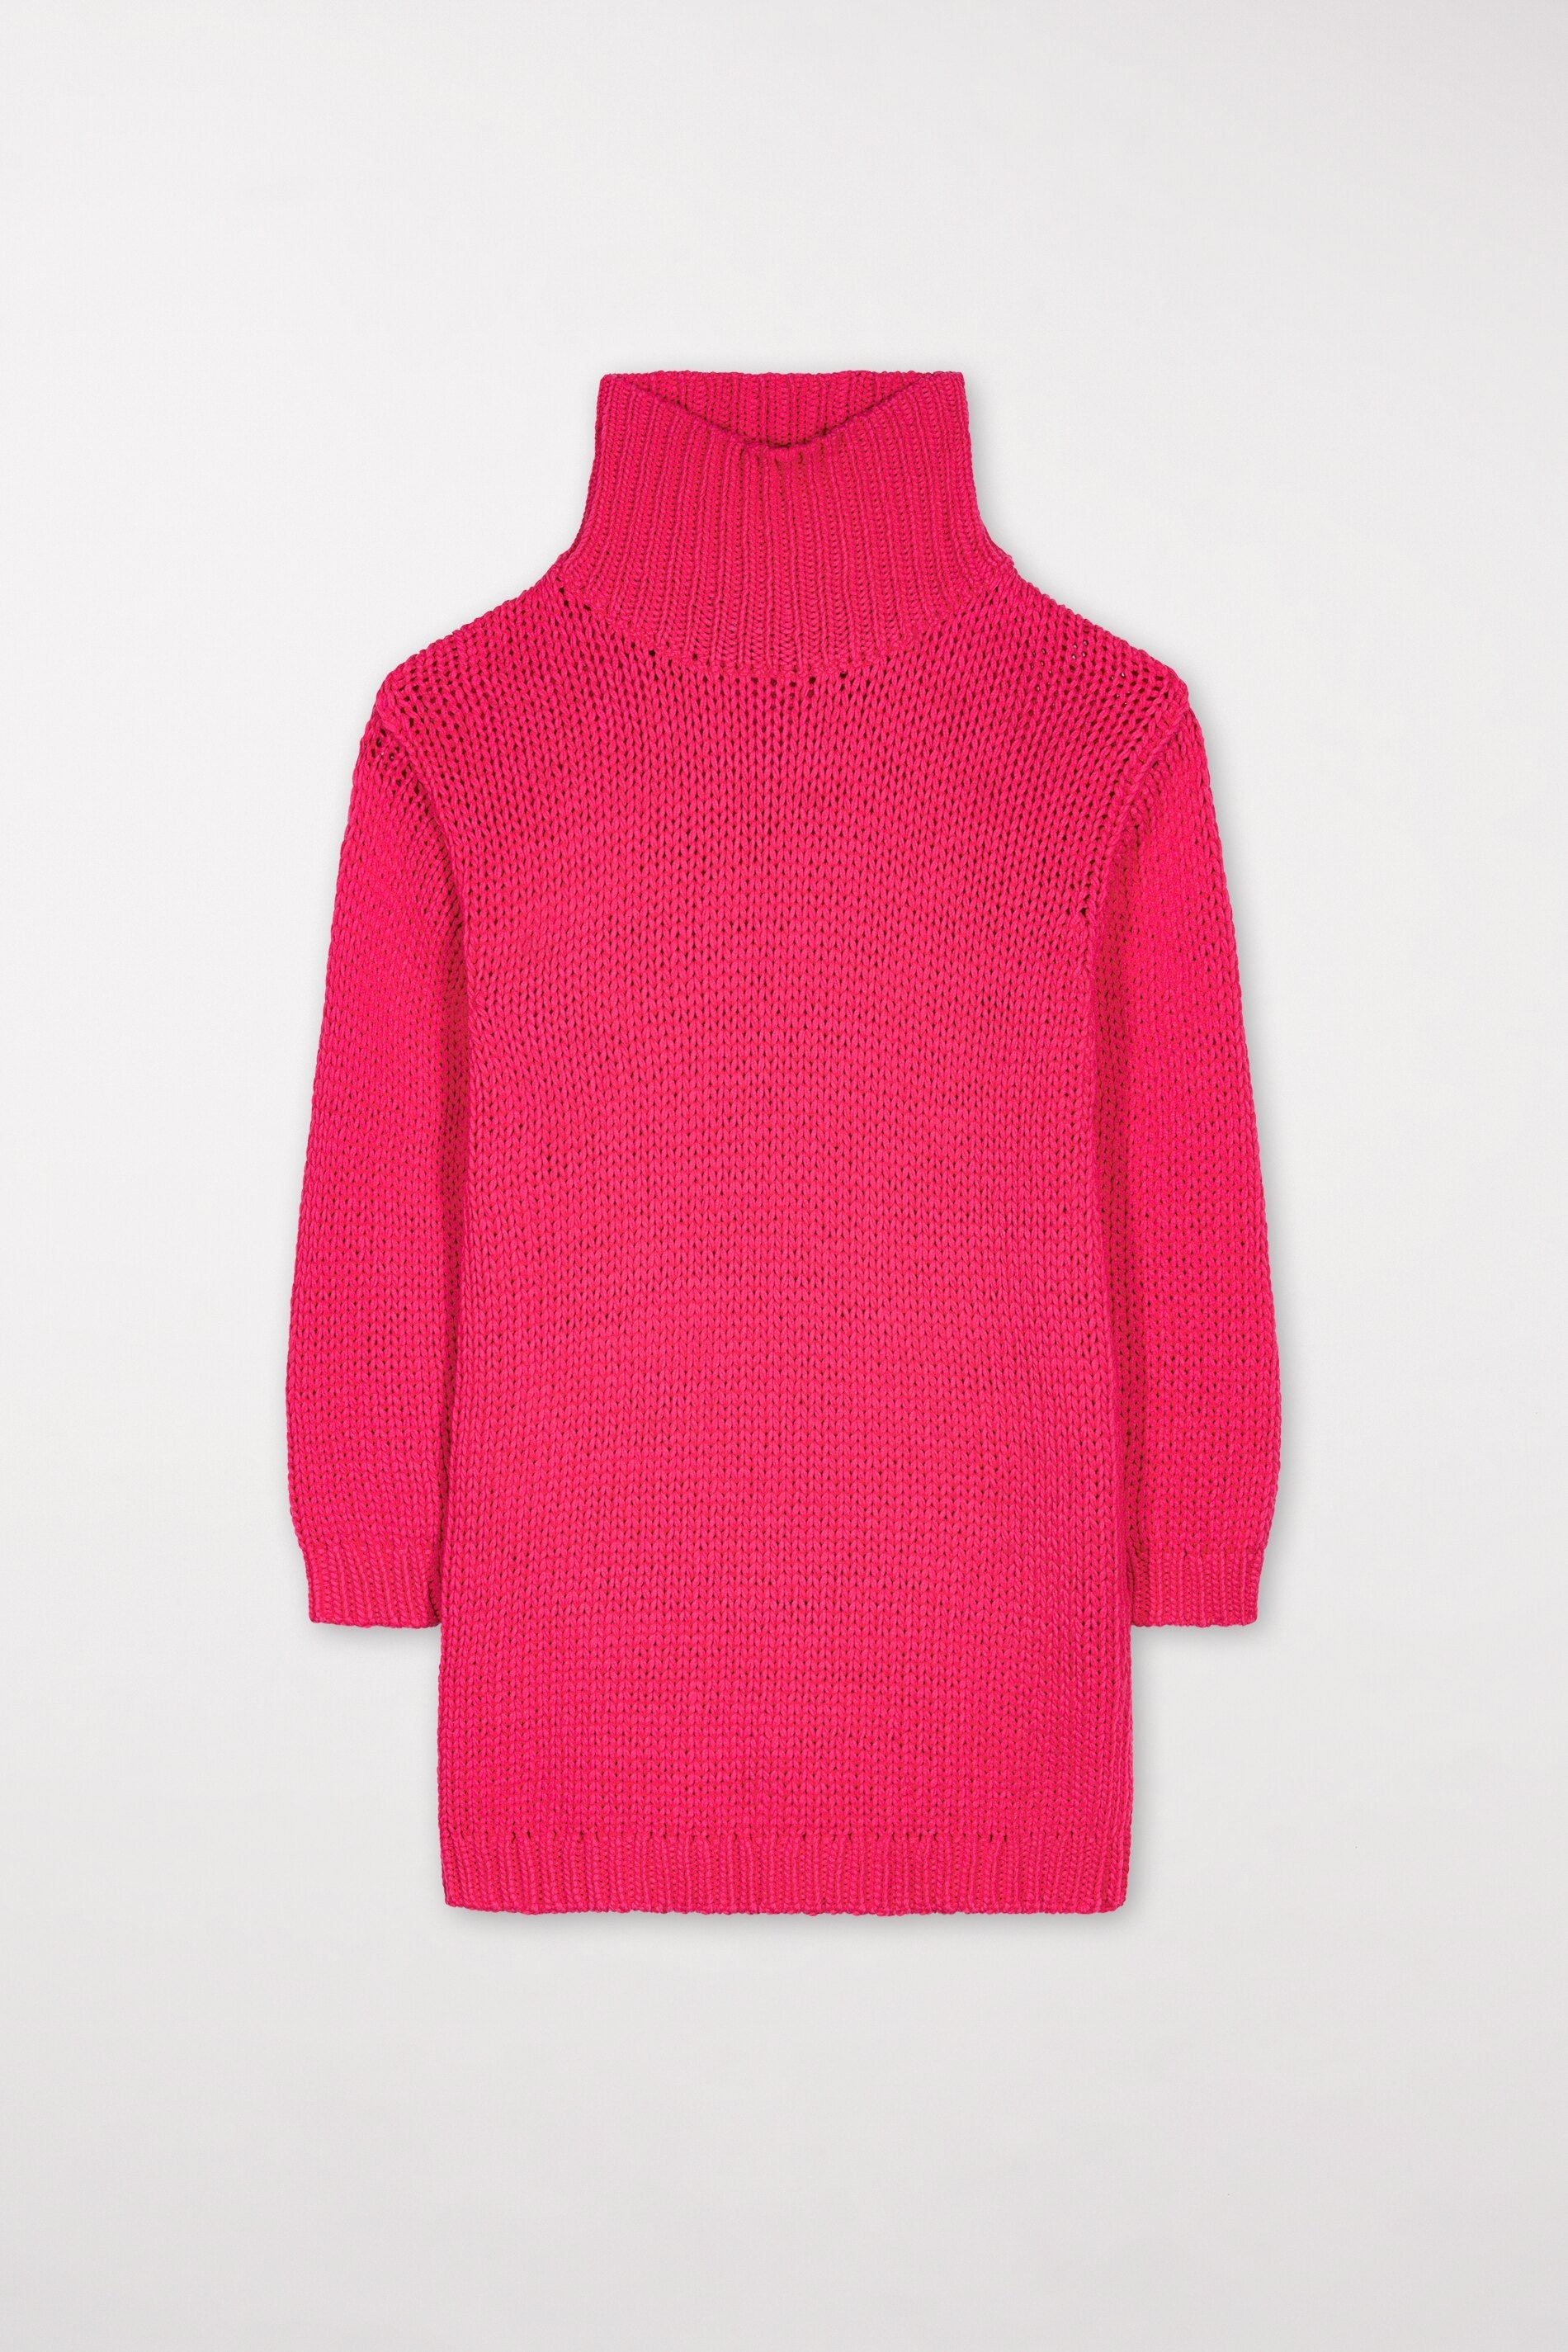 LUISA CERANO-OUTLET-SALE-Long-Pullover mit Rippdetails-Strick-by-ARCHIVIST